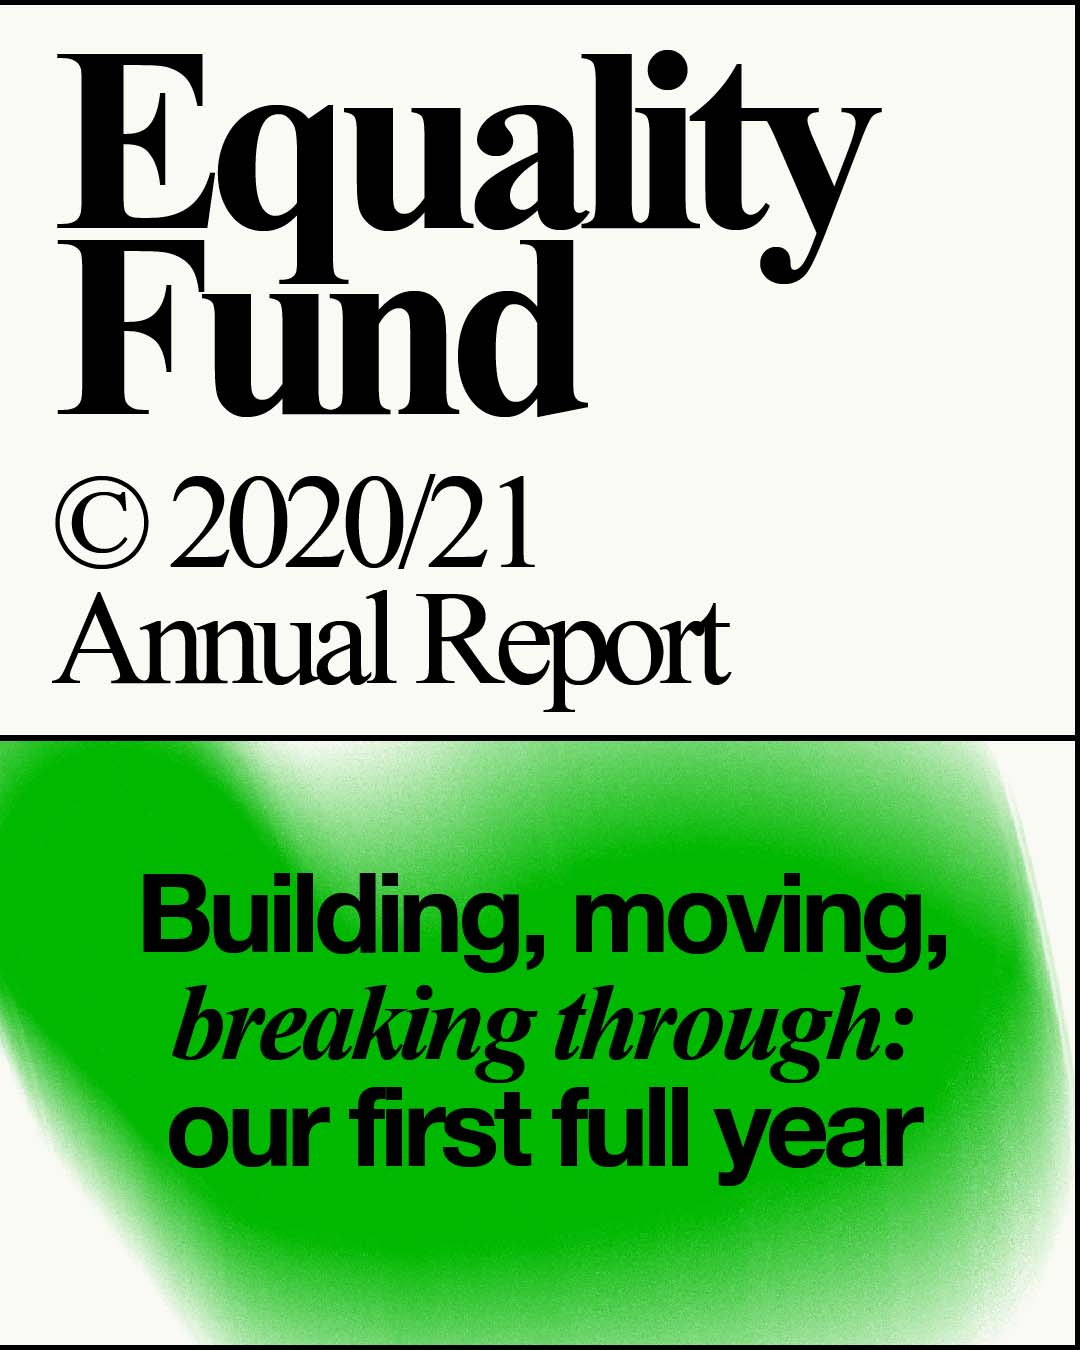 Equality Fund Annual Report